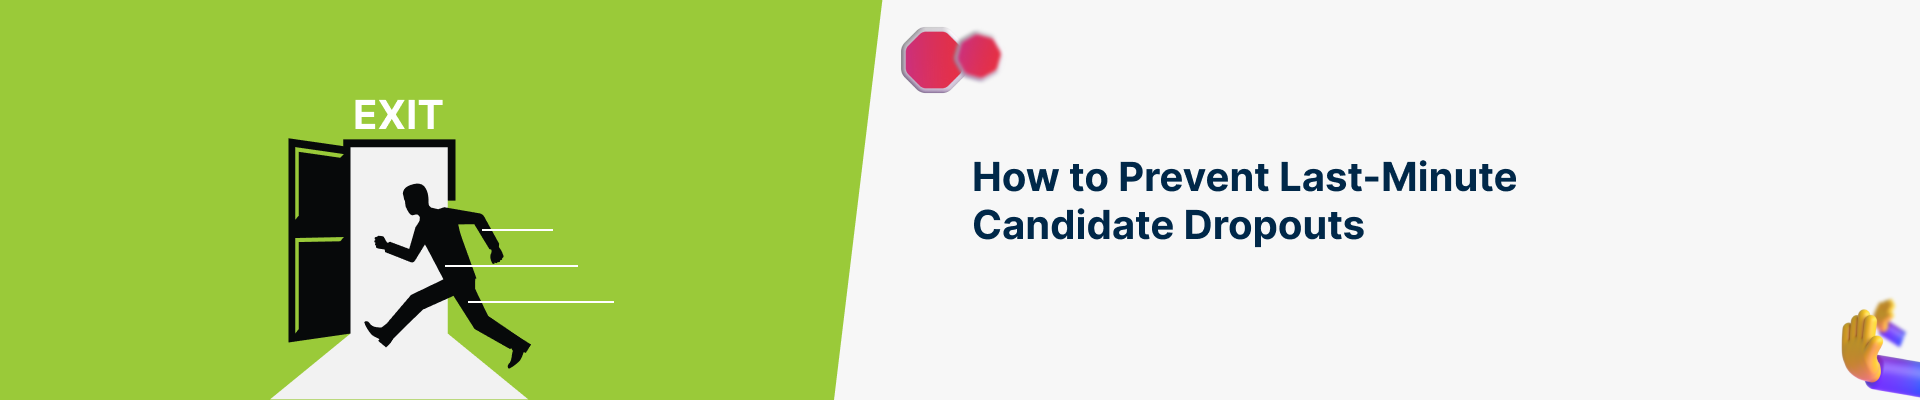 How to Prevent Last-Minute Candidate Dropouts